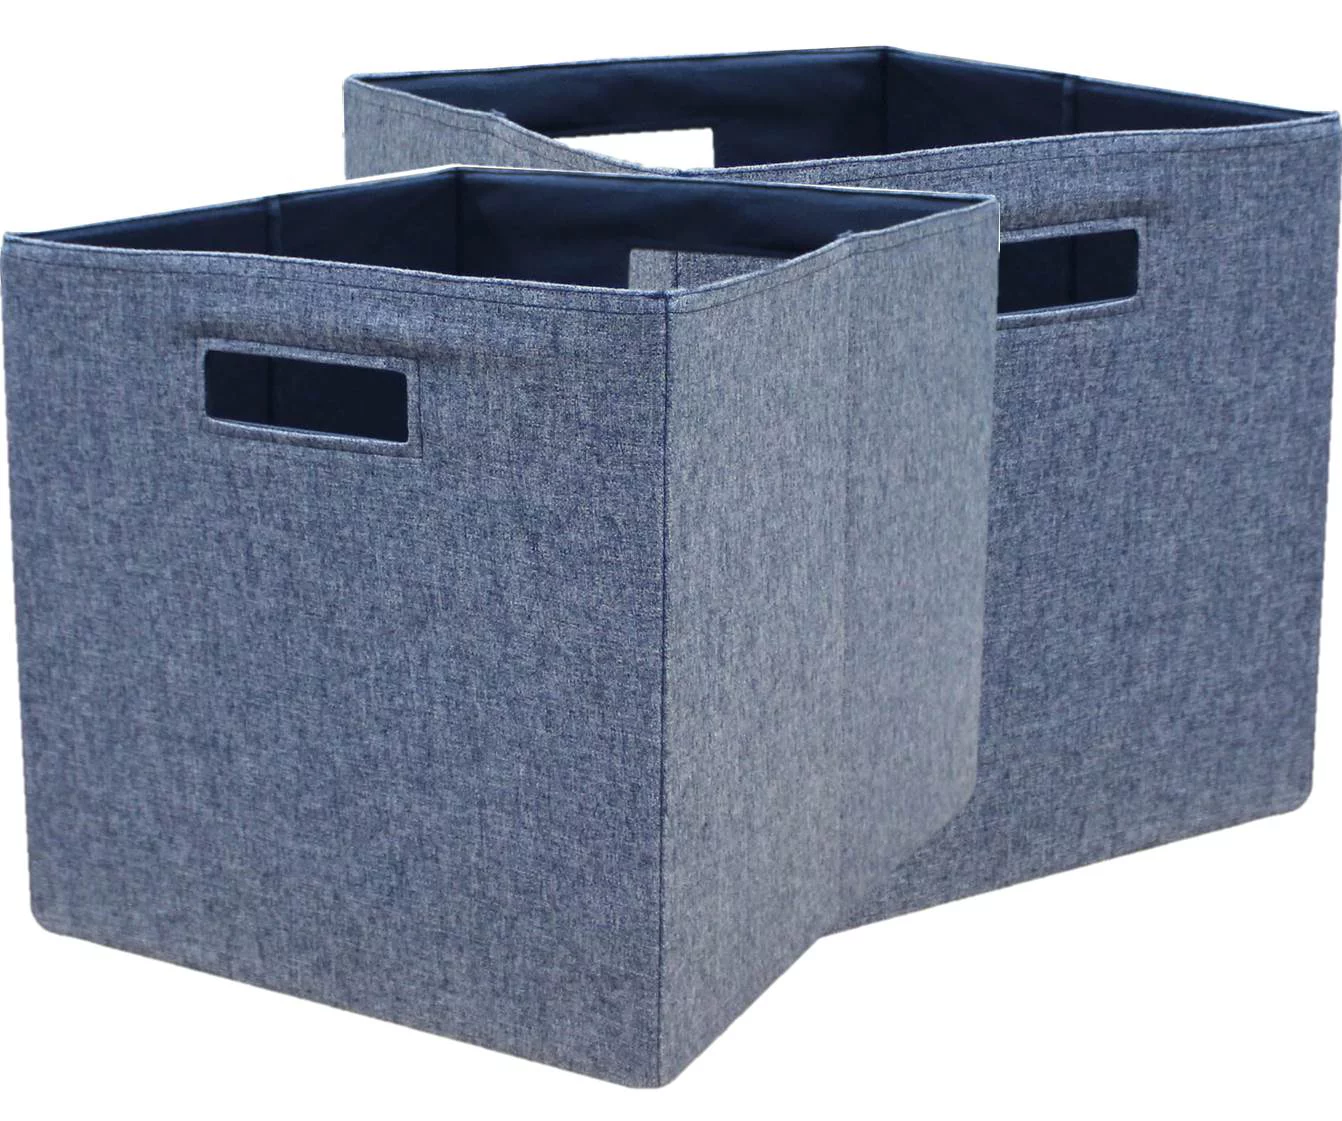 Better Homes & Gardens Fabric Cube Storage Bins (12.75" x 12.75"), Set of 2, Multiple Colors